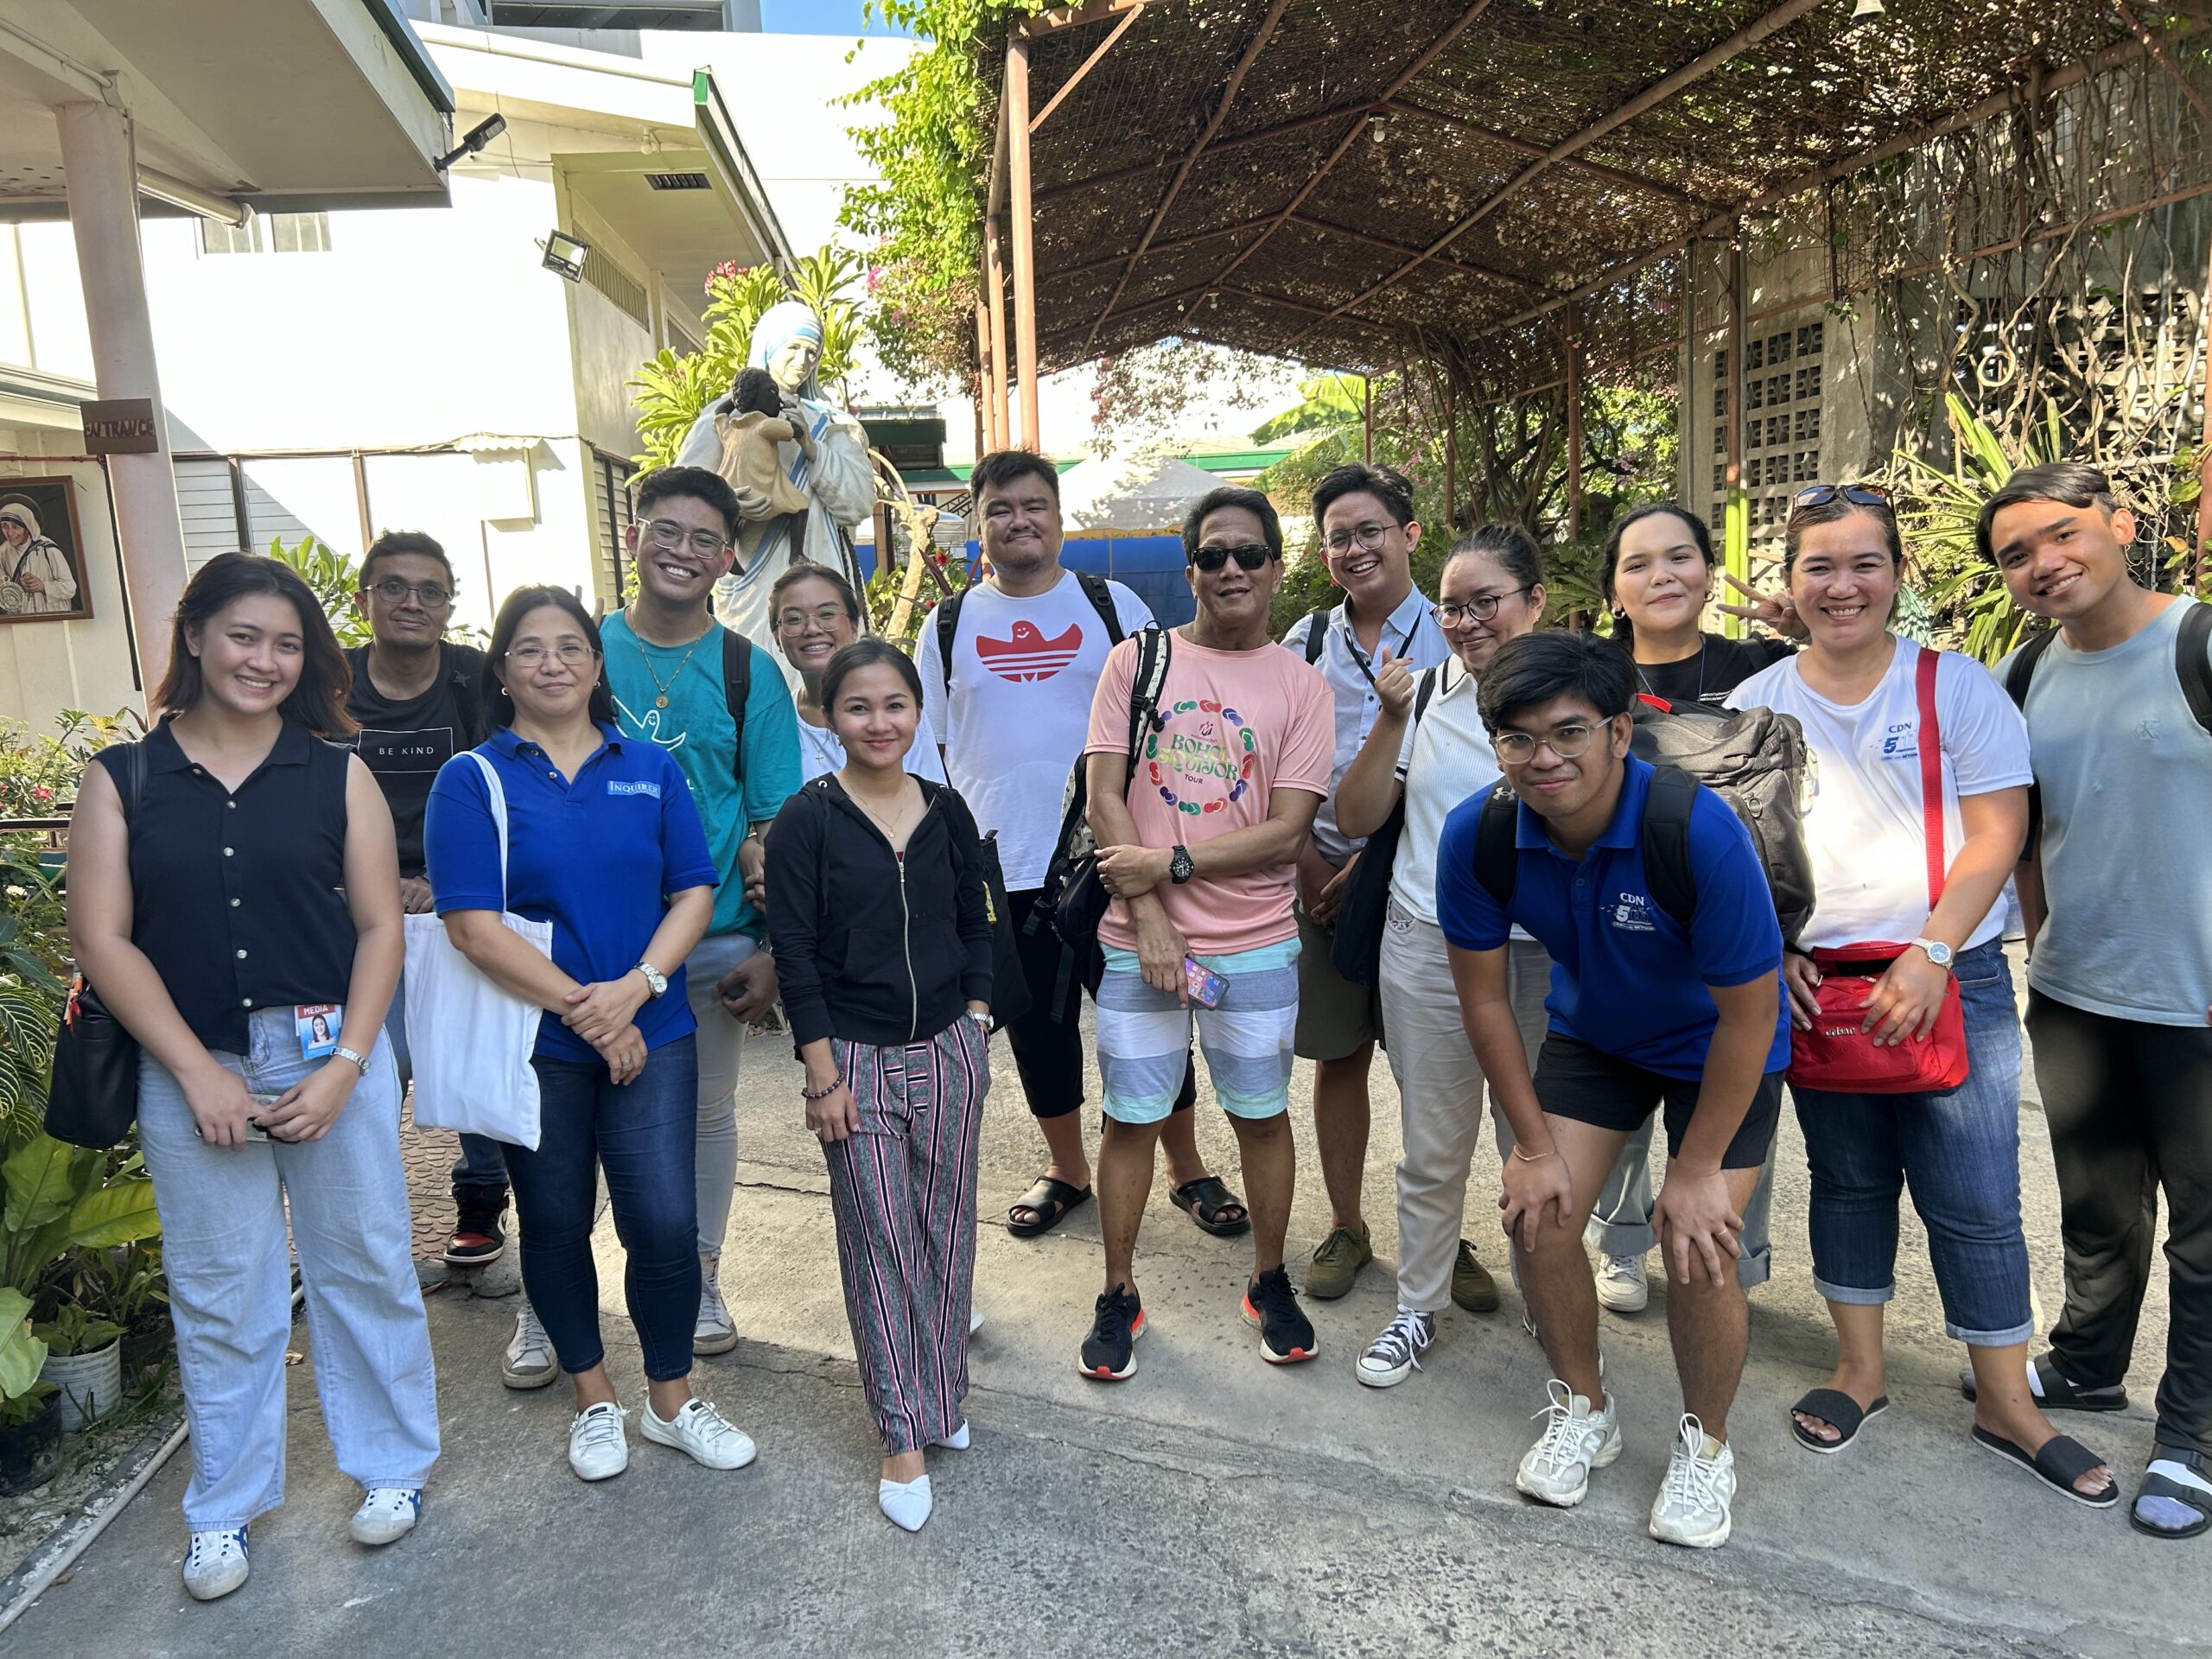 CDN Digital gives back on its 5th anniversary with the elderly of Gasa sa Gugma